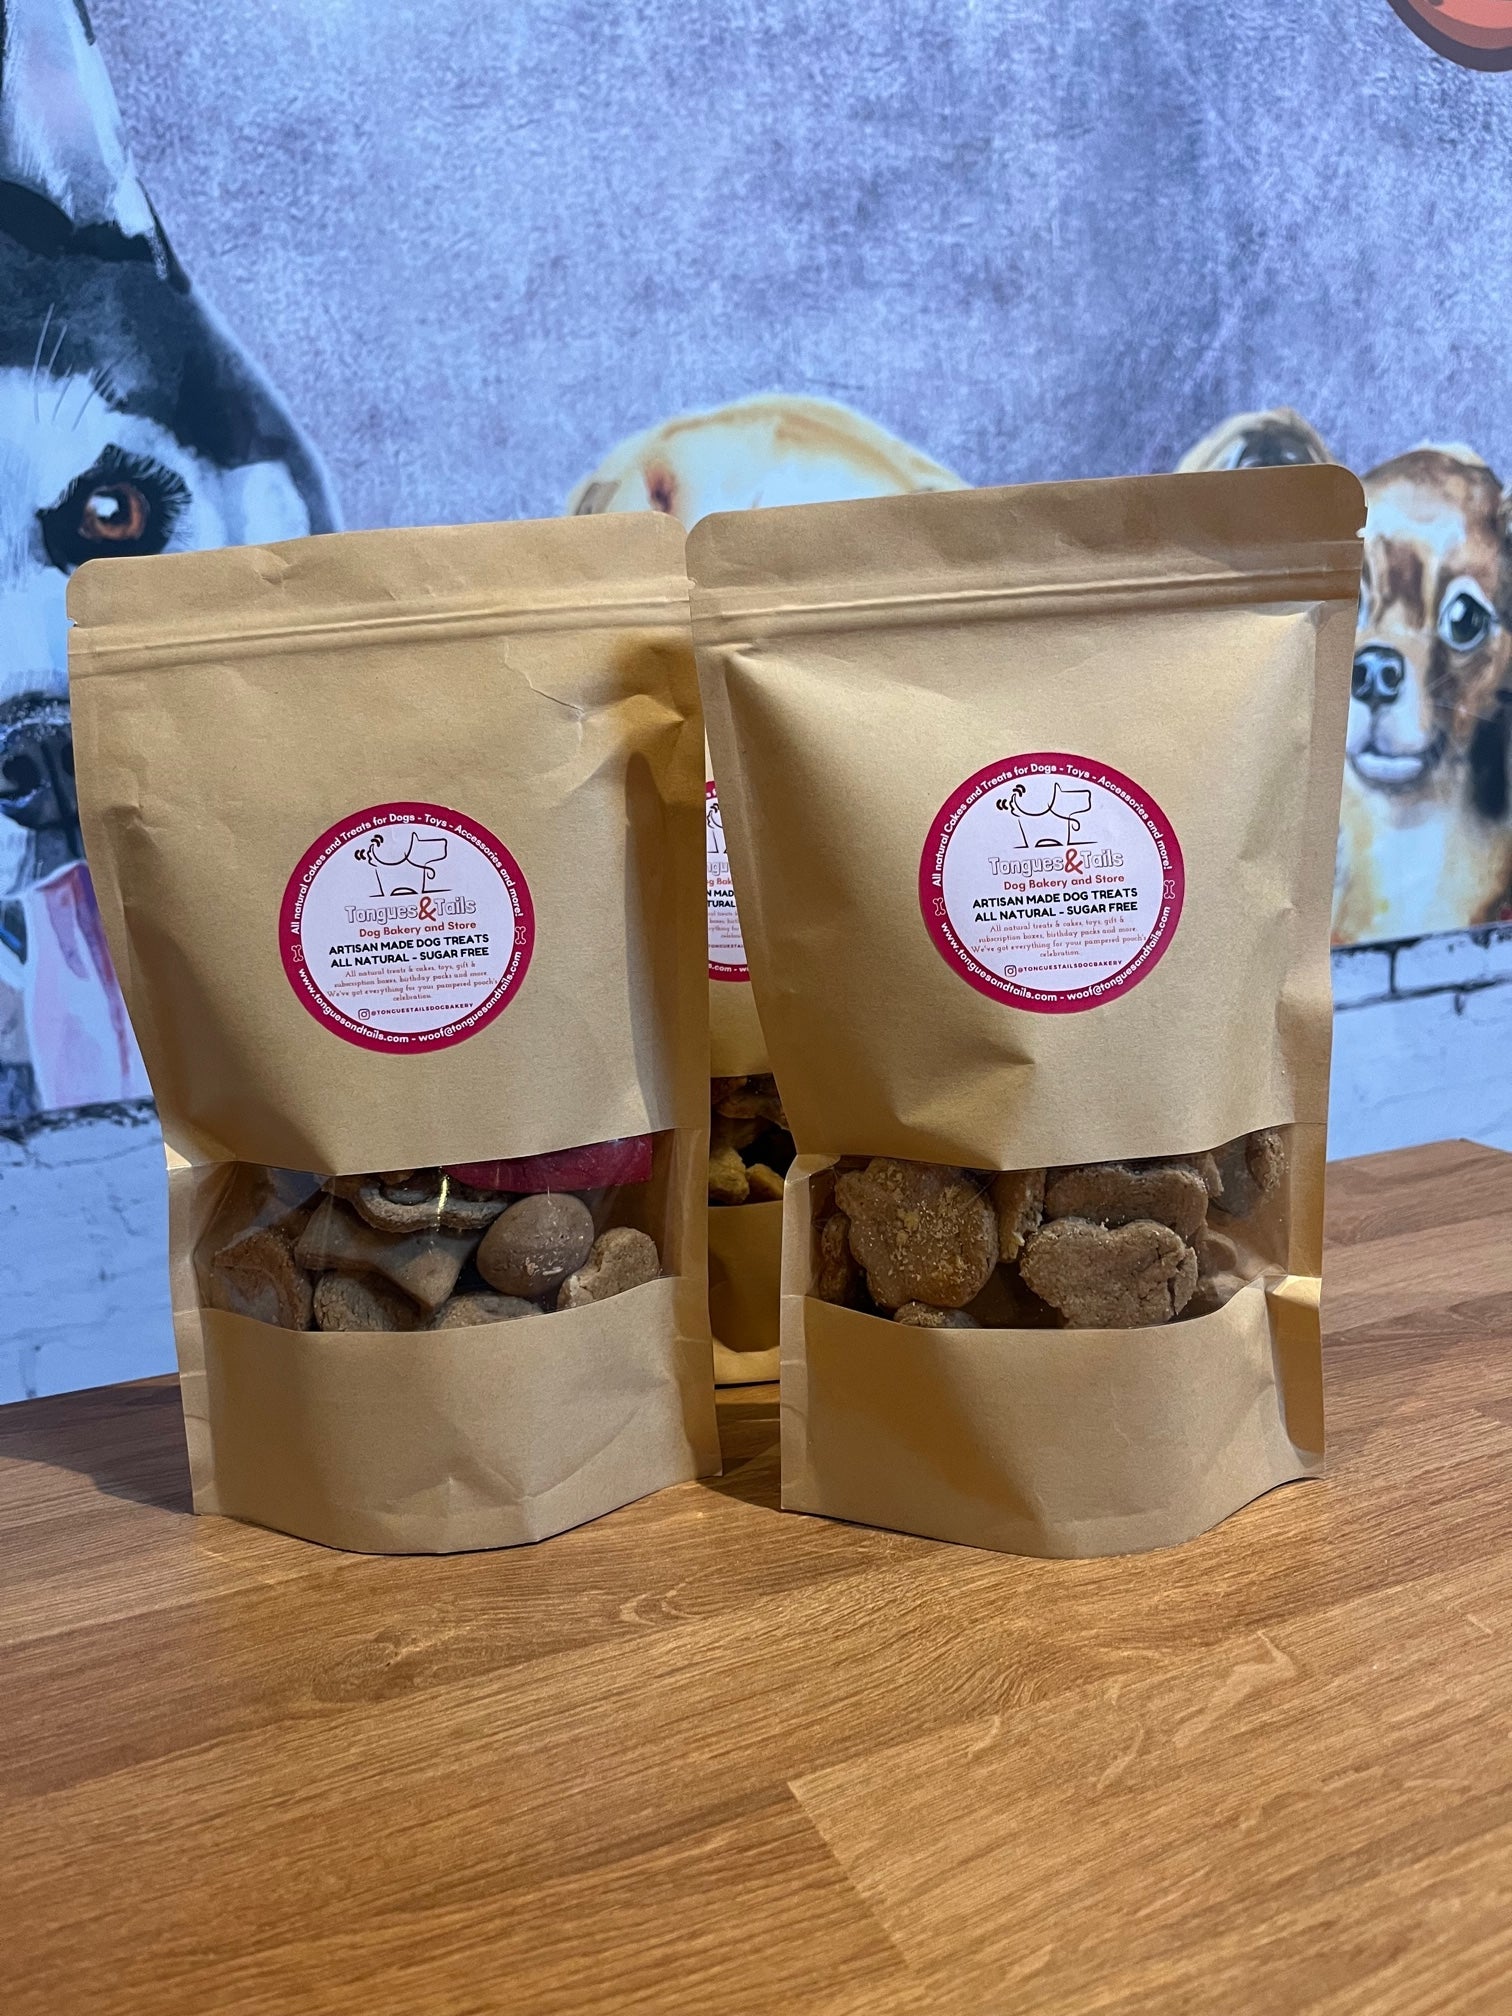 Tongues and Tails Baked Dog Treats